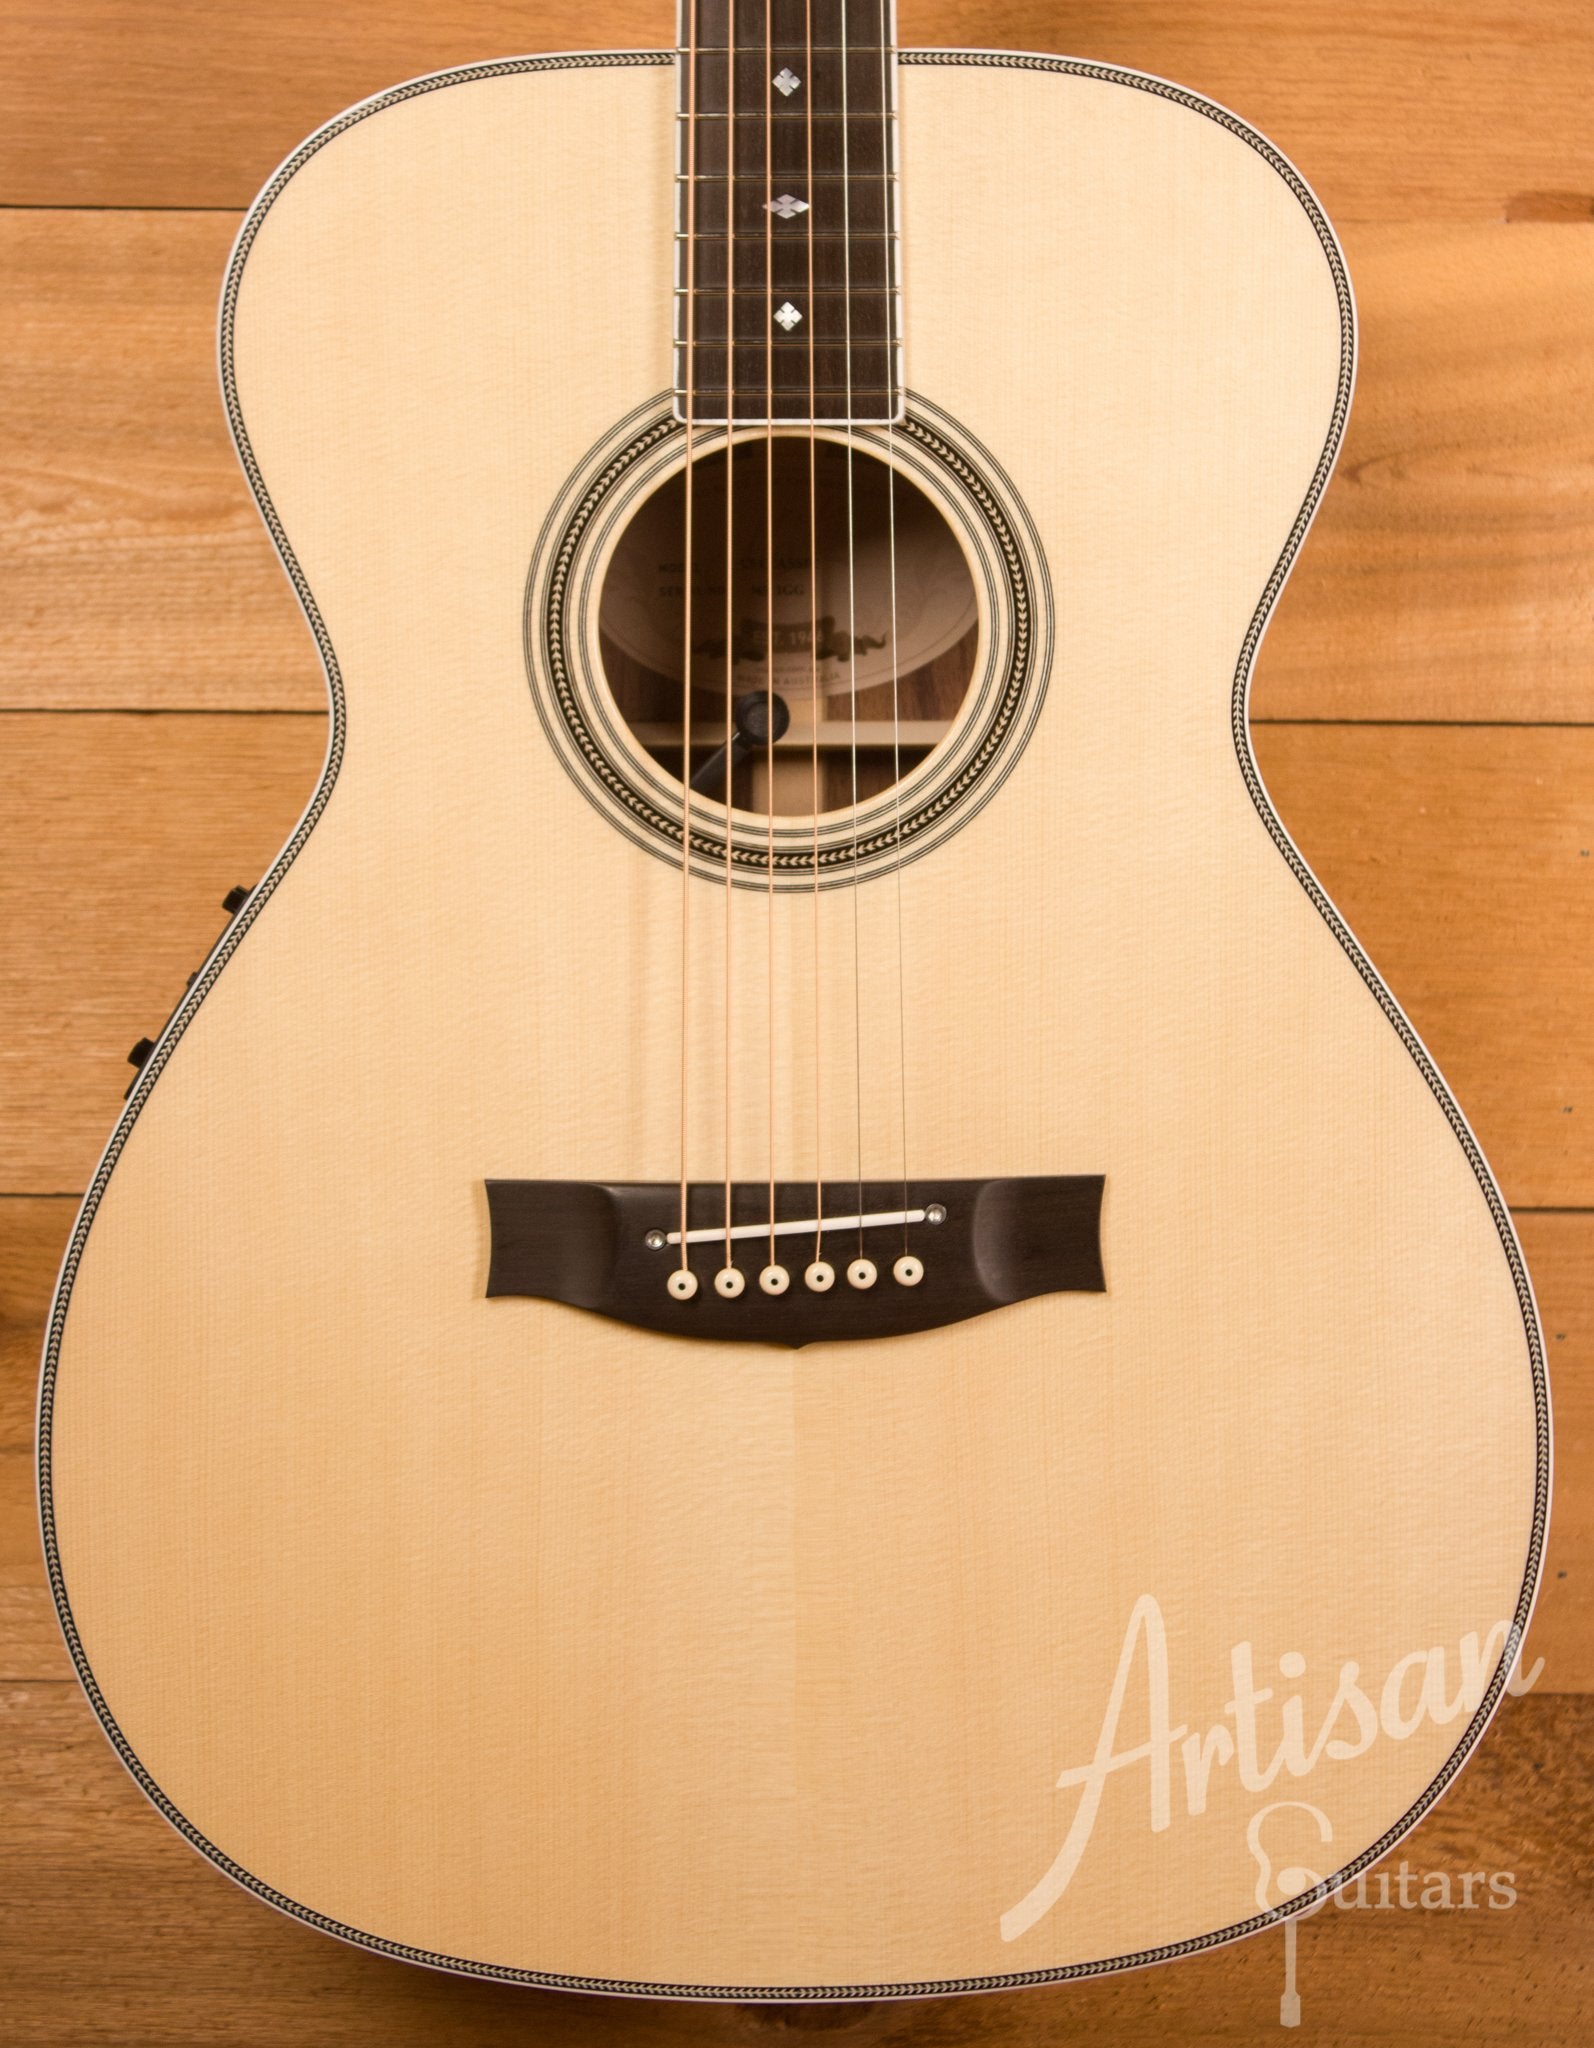 Maton Custom Shop Classic Traditional Guitar with European Spruce and Indian Rosewood ID-11574 - Artisan Guitars